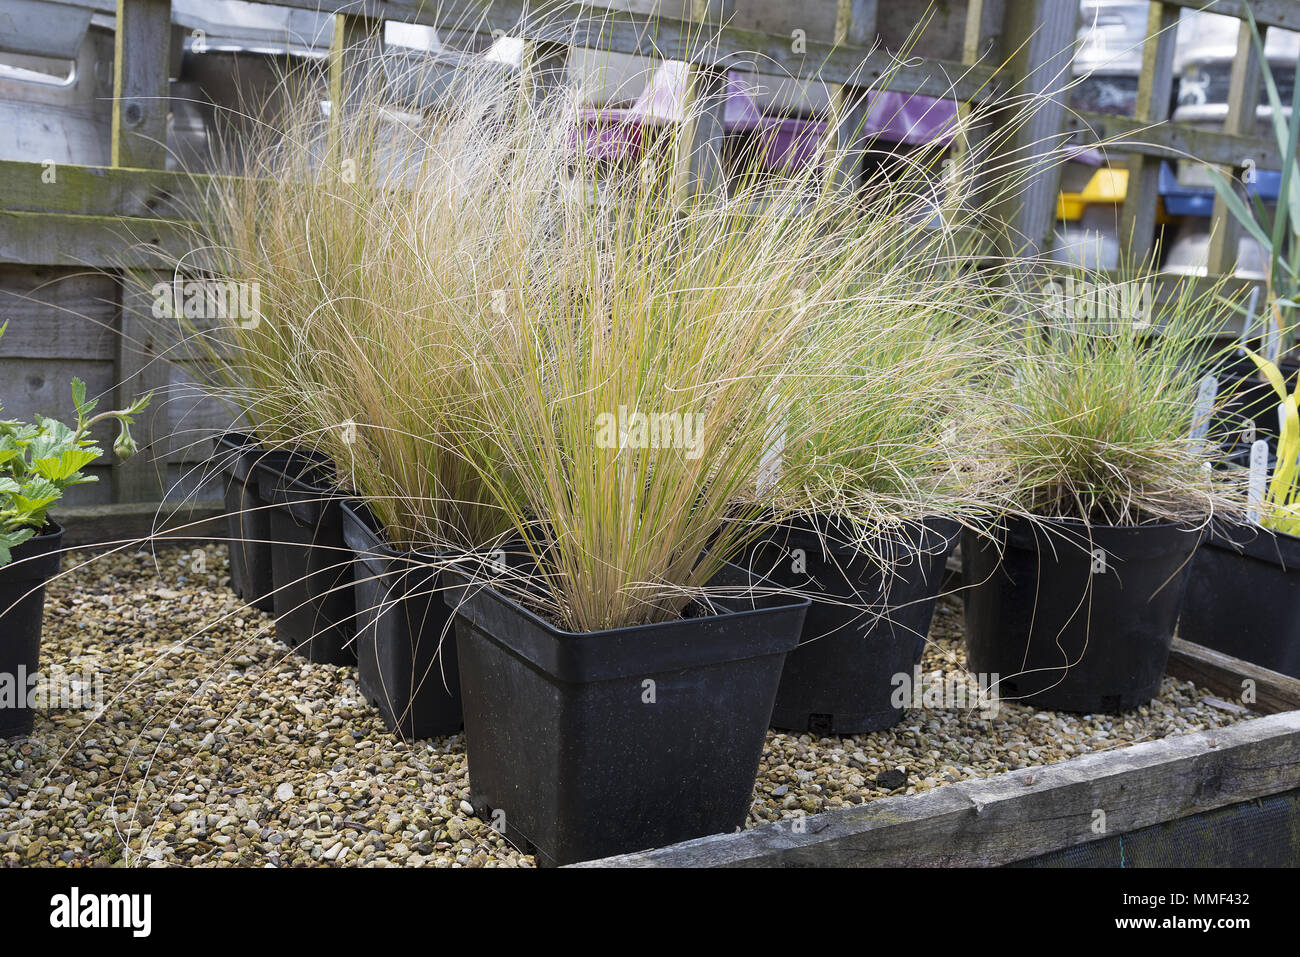 Ornamental grasses growing in pots ready to be planted into the garden. Stock Photo